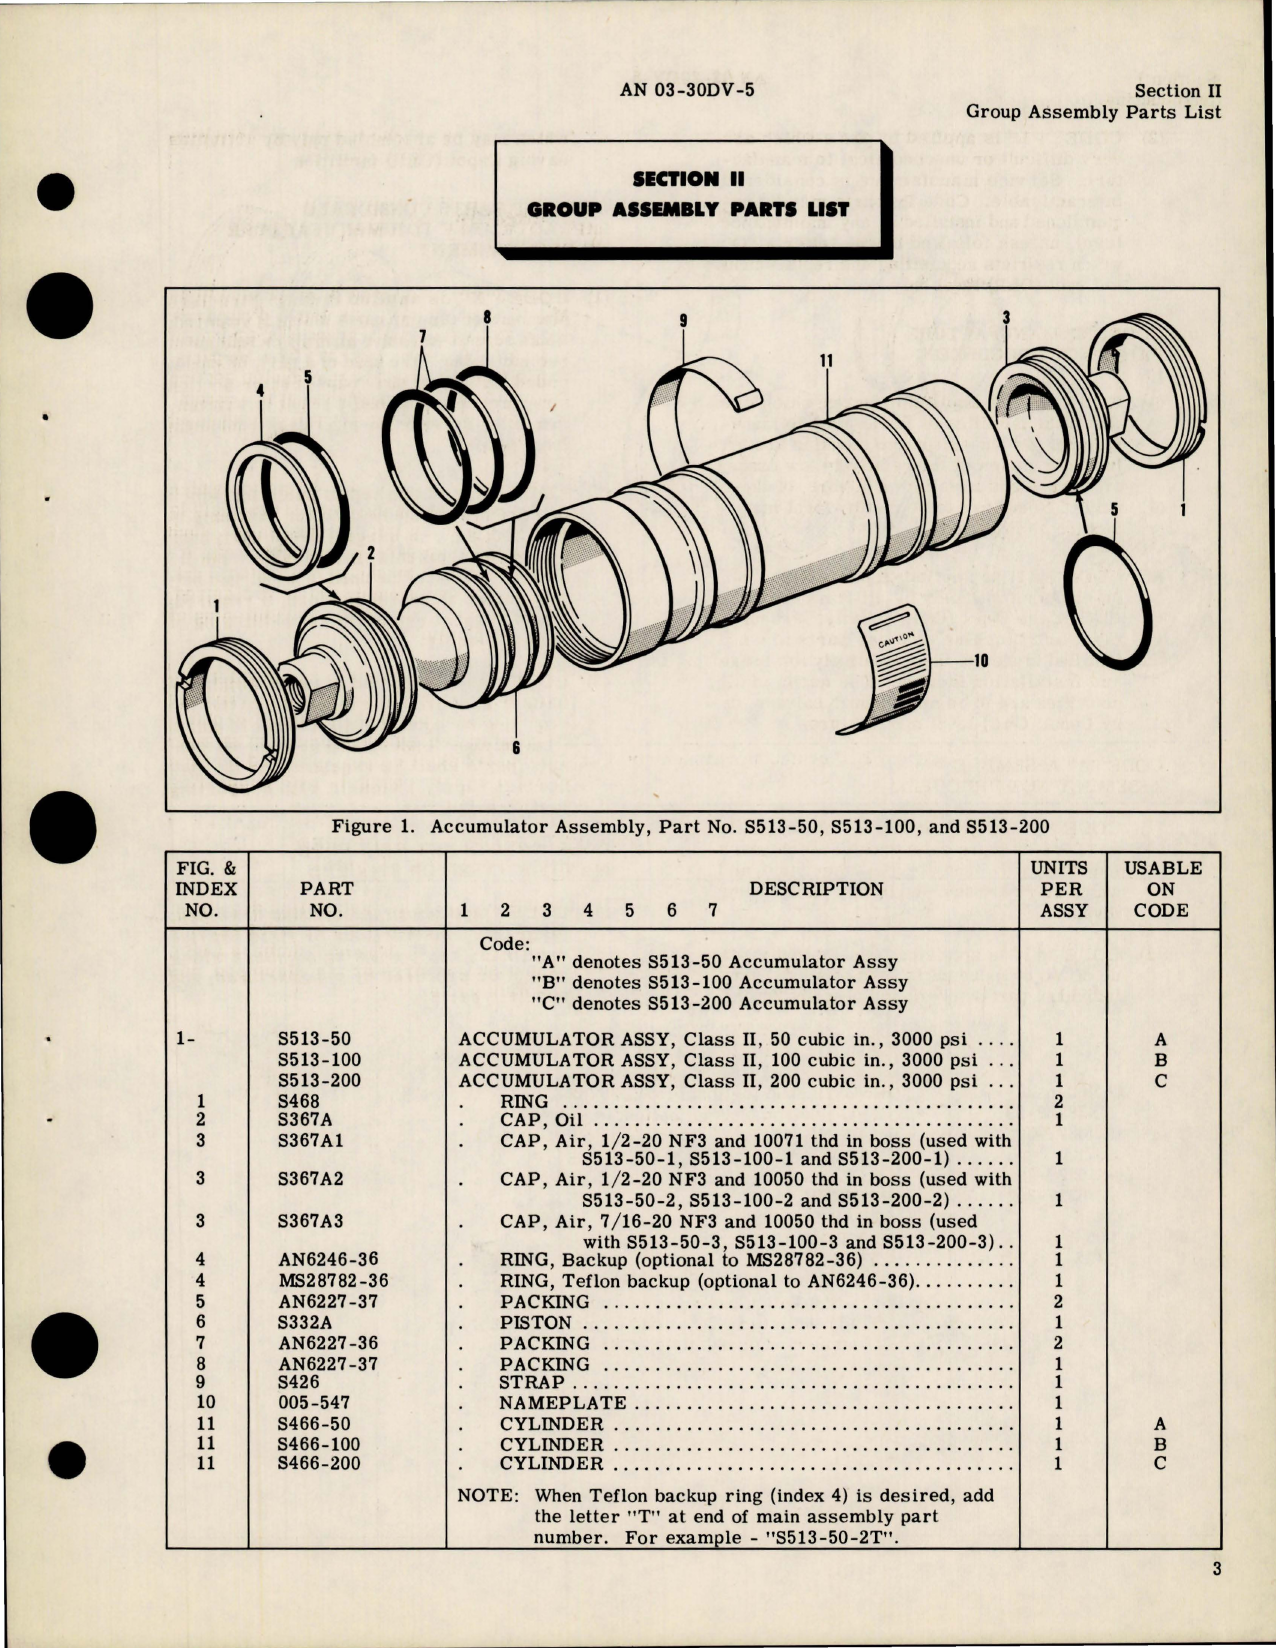 Sample page 5 from AirCorps Library document: Illustrated Parts Breakdown for Accumulators 